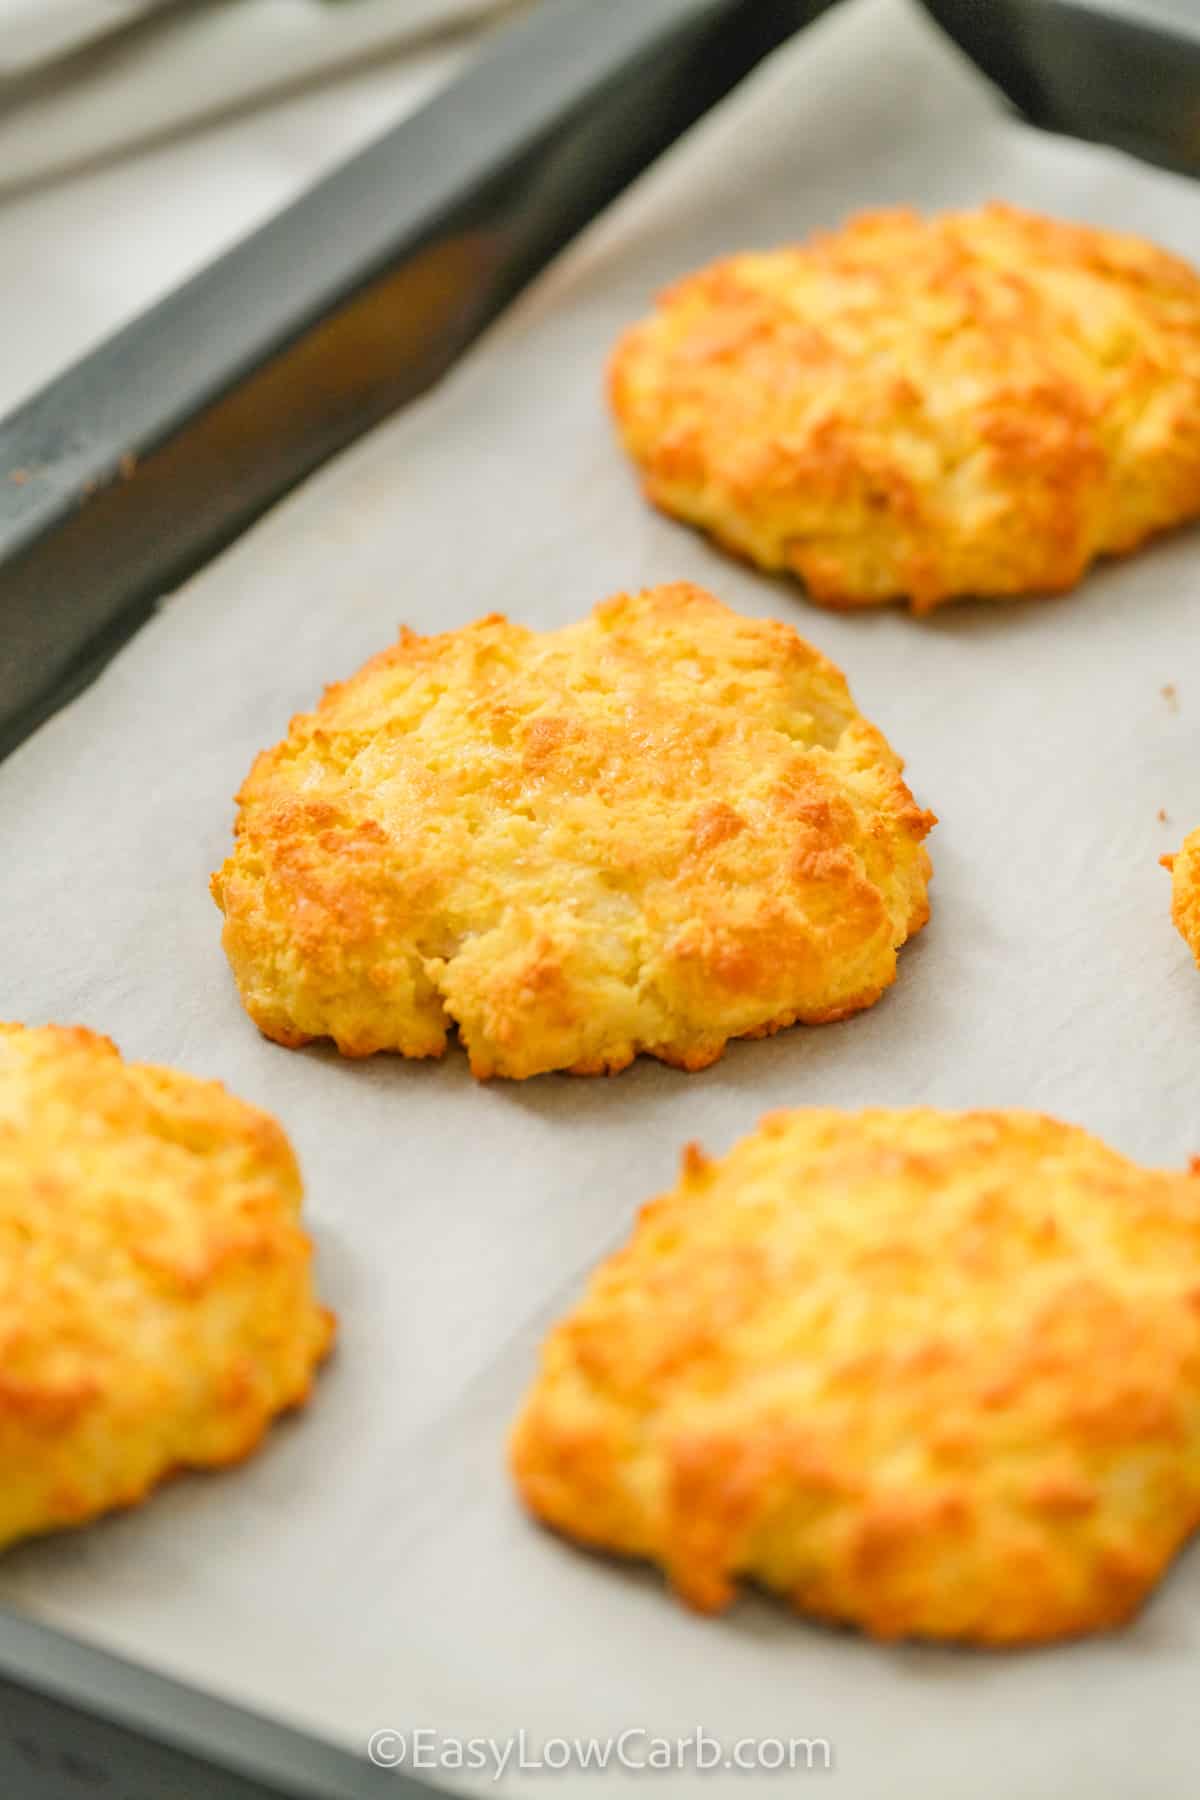 Keto biscuits baked on a baking tray